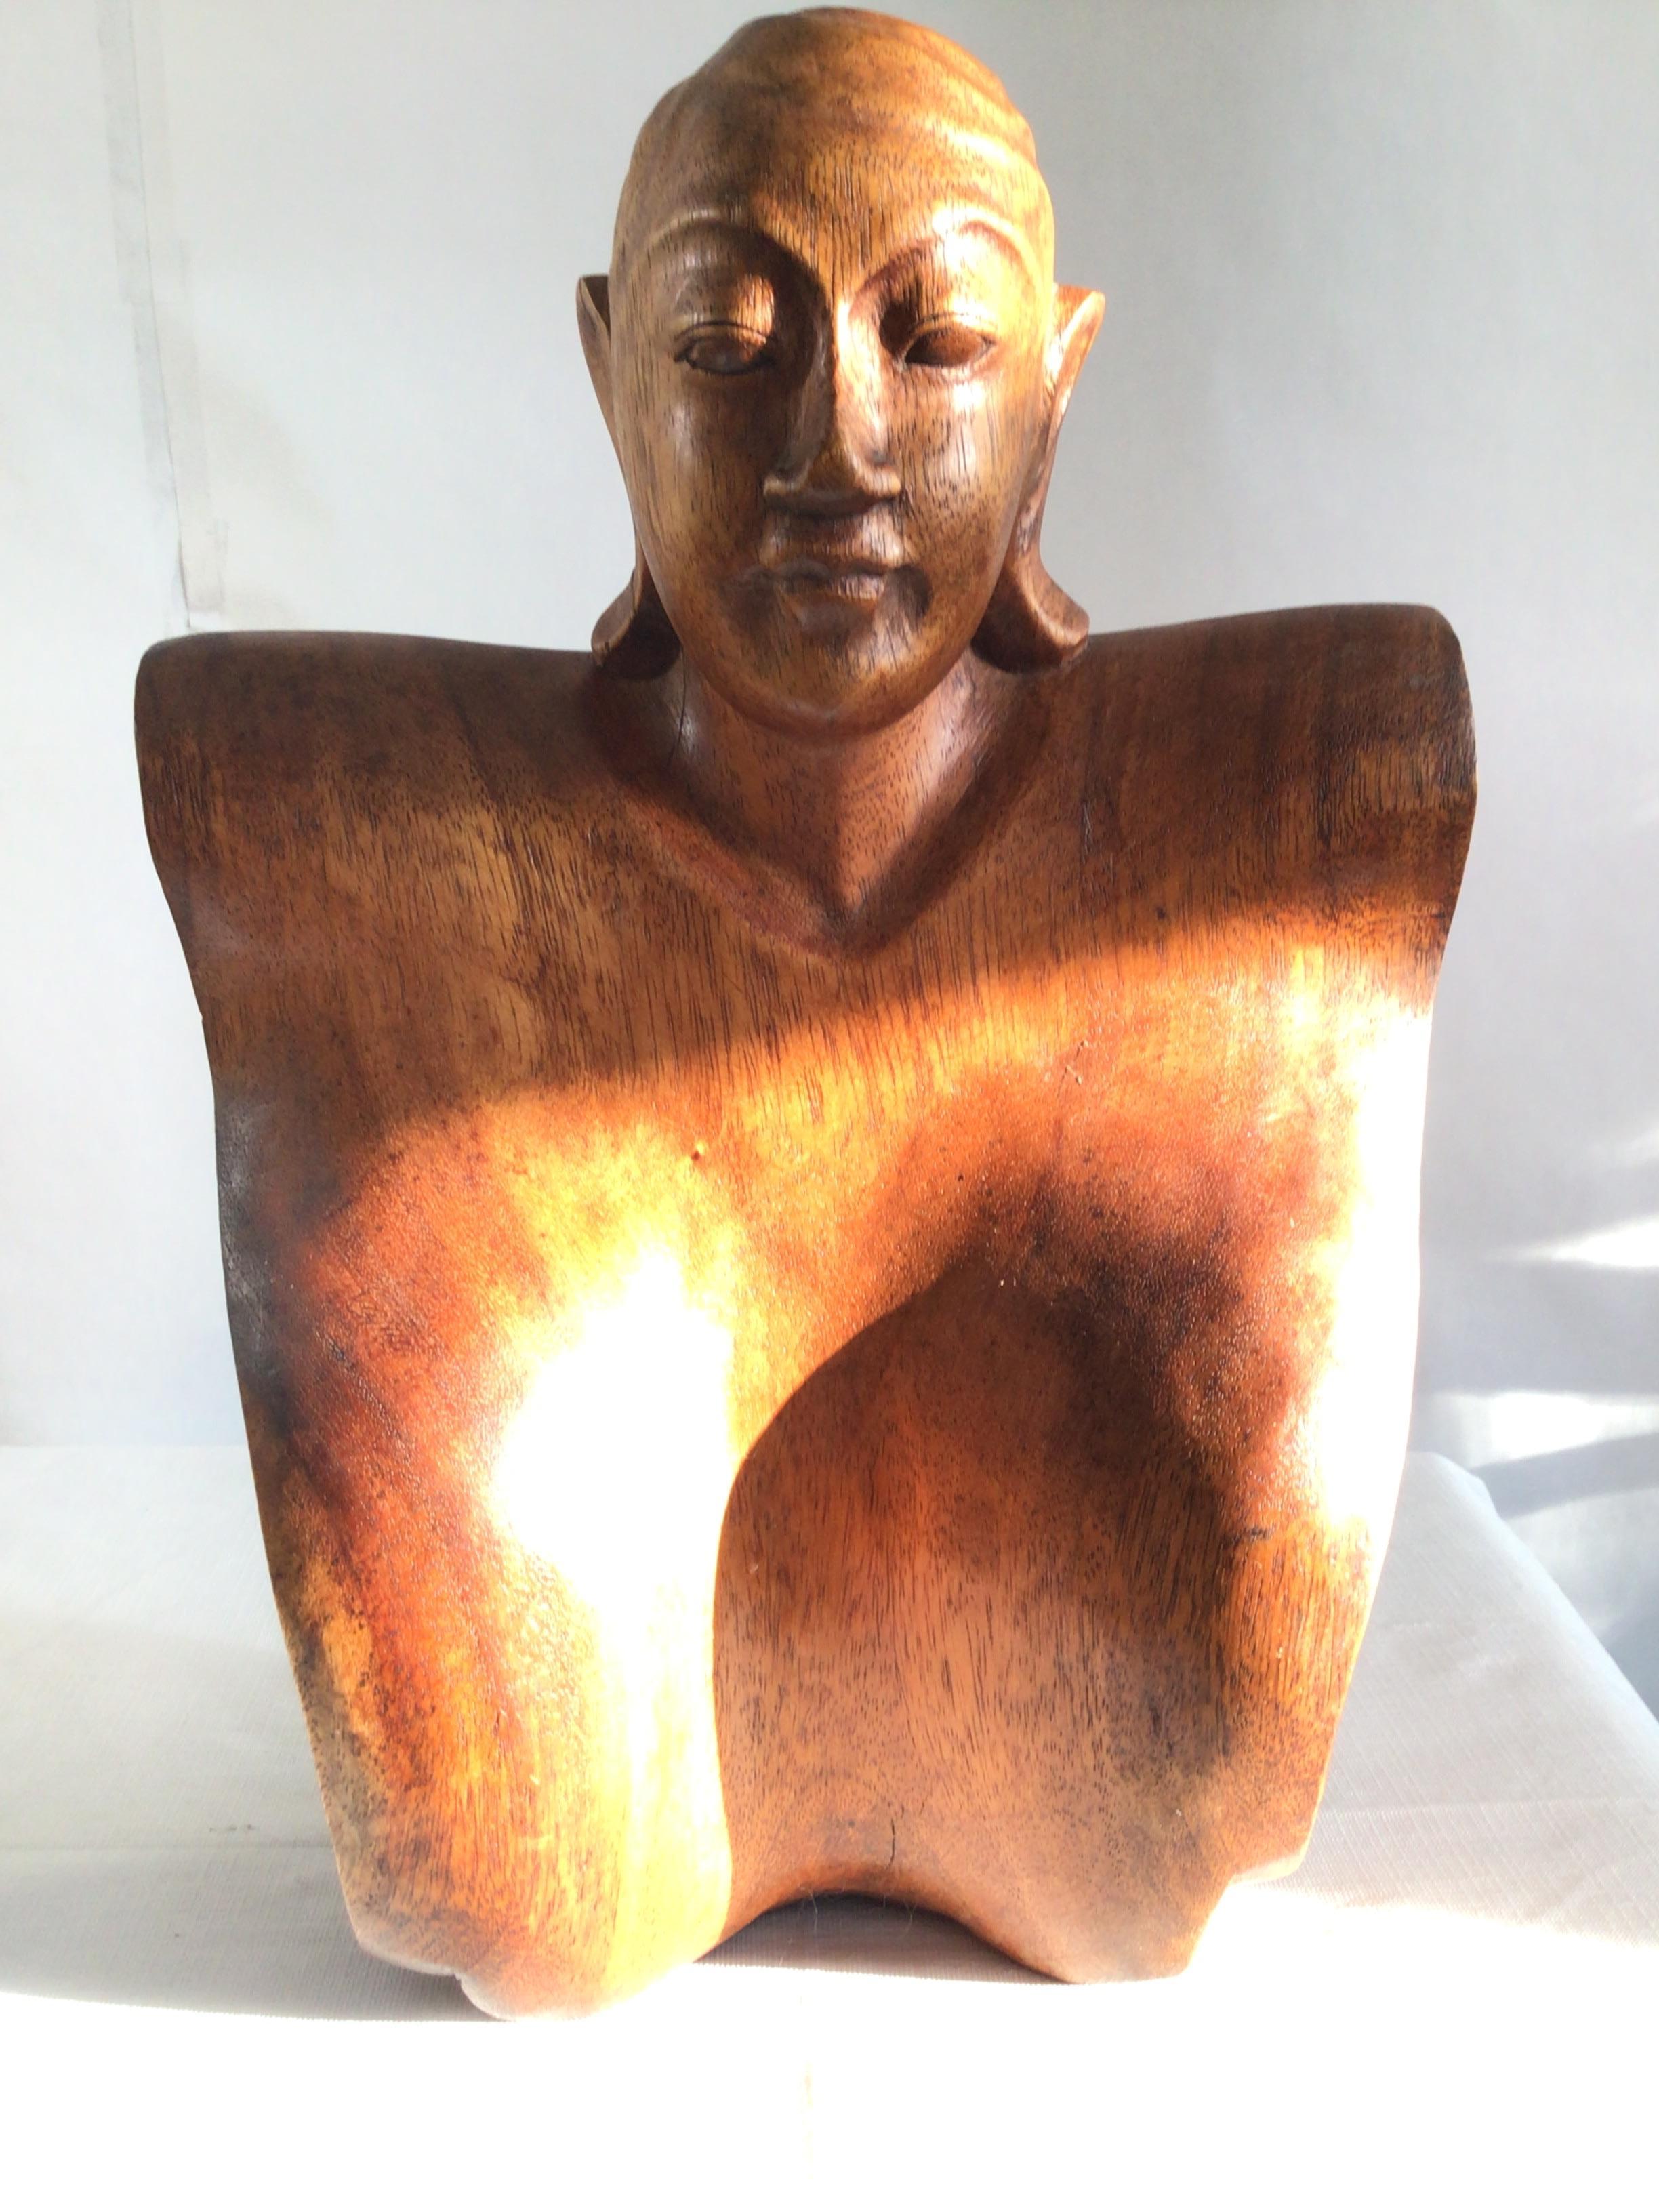 A beautiful 1950s Wood Sculptural Bust of a Woman
Sides appear as a scroll 
Richly Carved Wood
Crack in wood on left side.